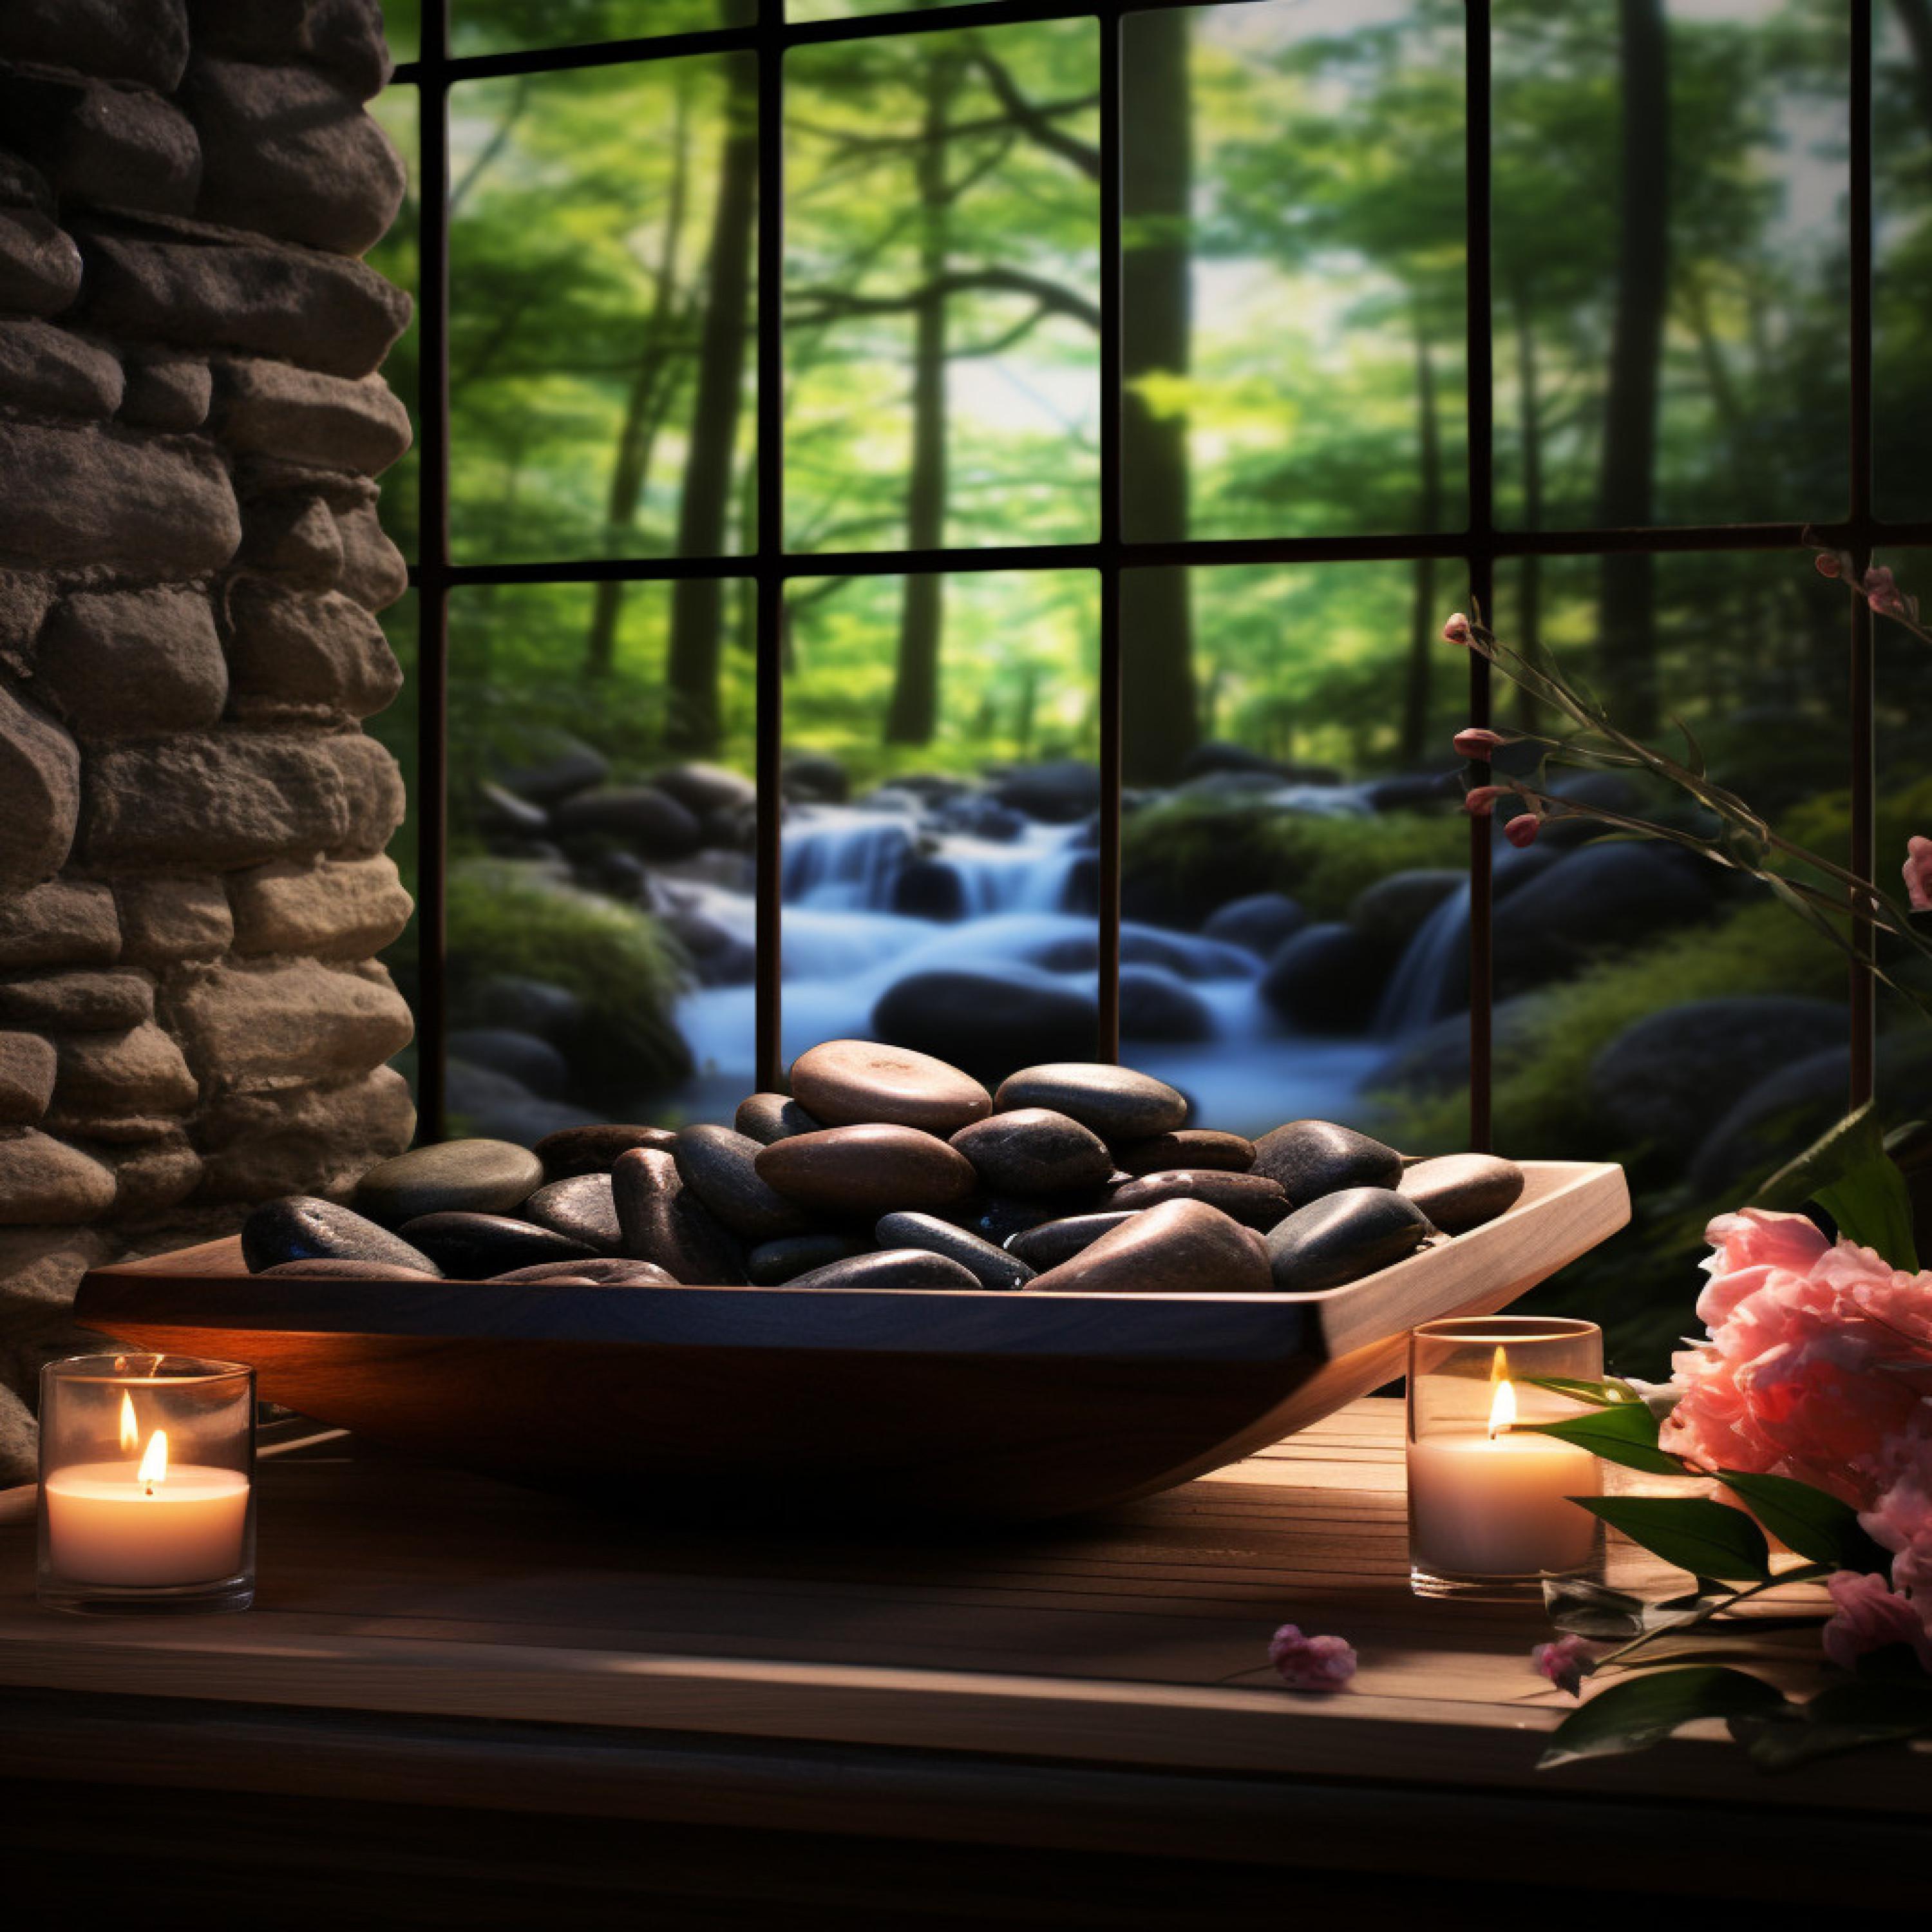 Pure Spa Massage Music - Massage by the Soothing River